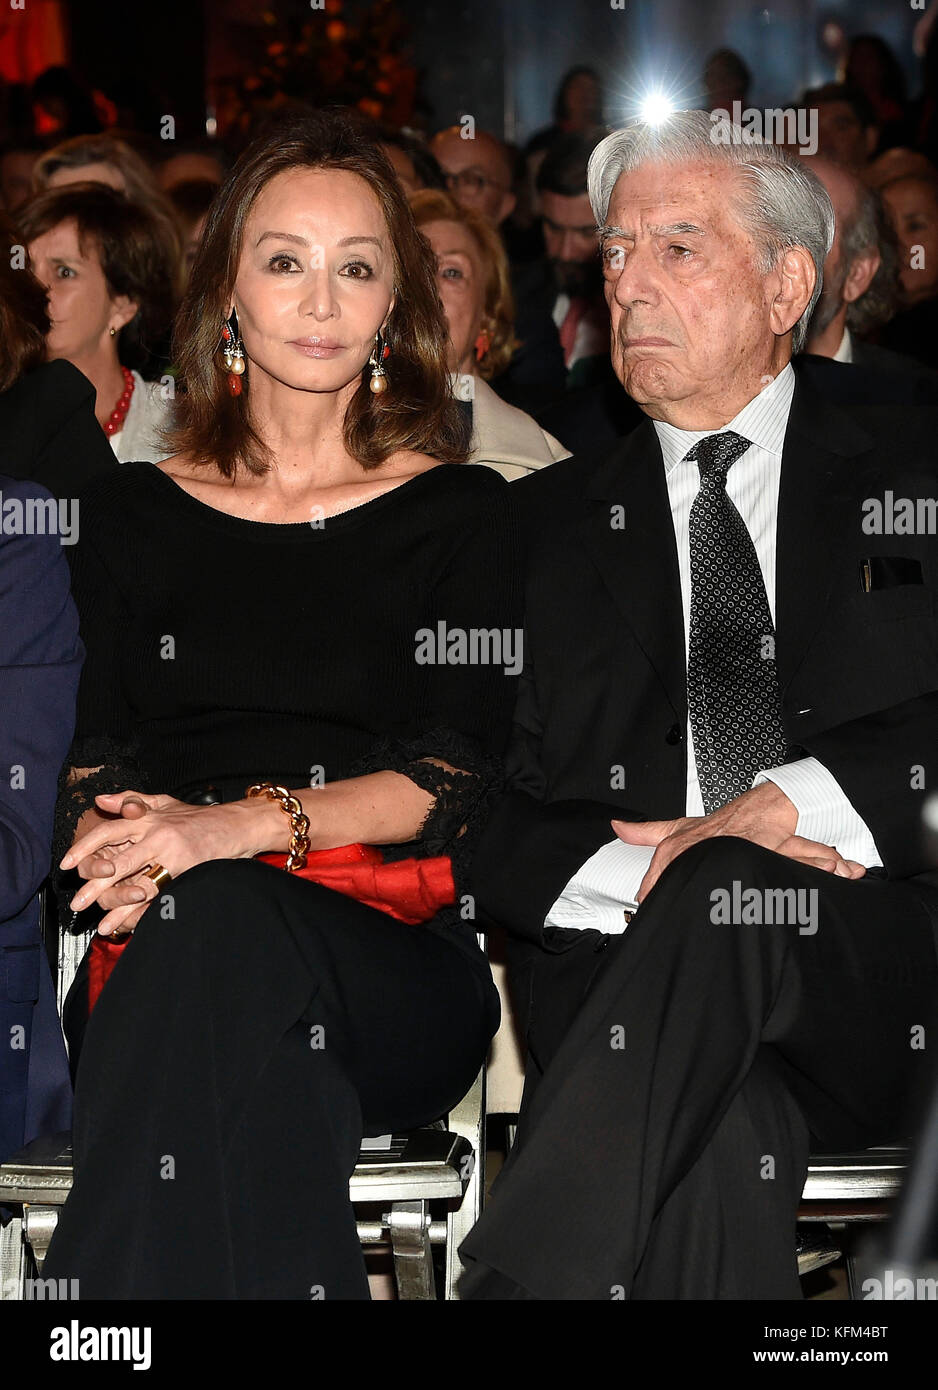 Isabel Preysler and Mario Vargas Llosa during the celebration of the 25th Anniversary of the Thyssen-Bornemisza National Museum in Madrid on Monday 30 October 2017-. Credit: Gtres Información más Comuniación on line, S.L./Alamy Live News Stock Photo